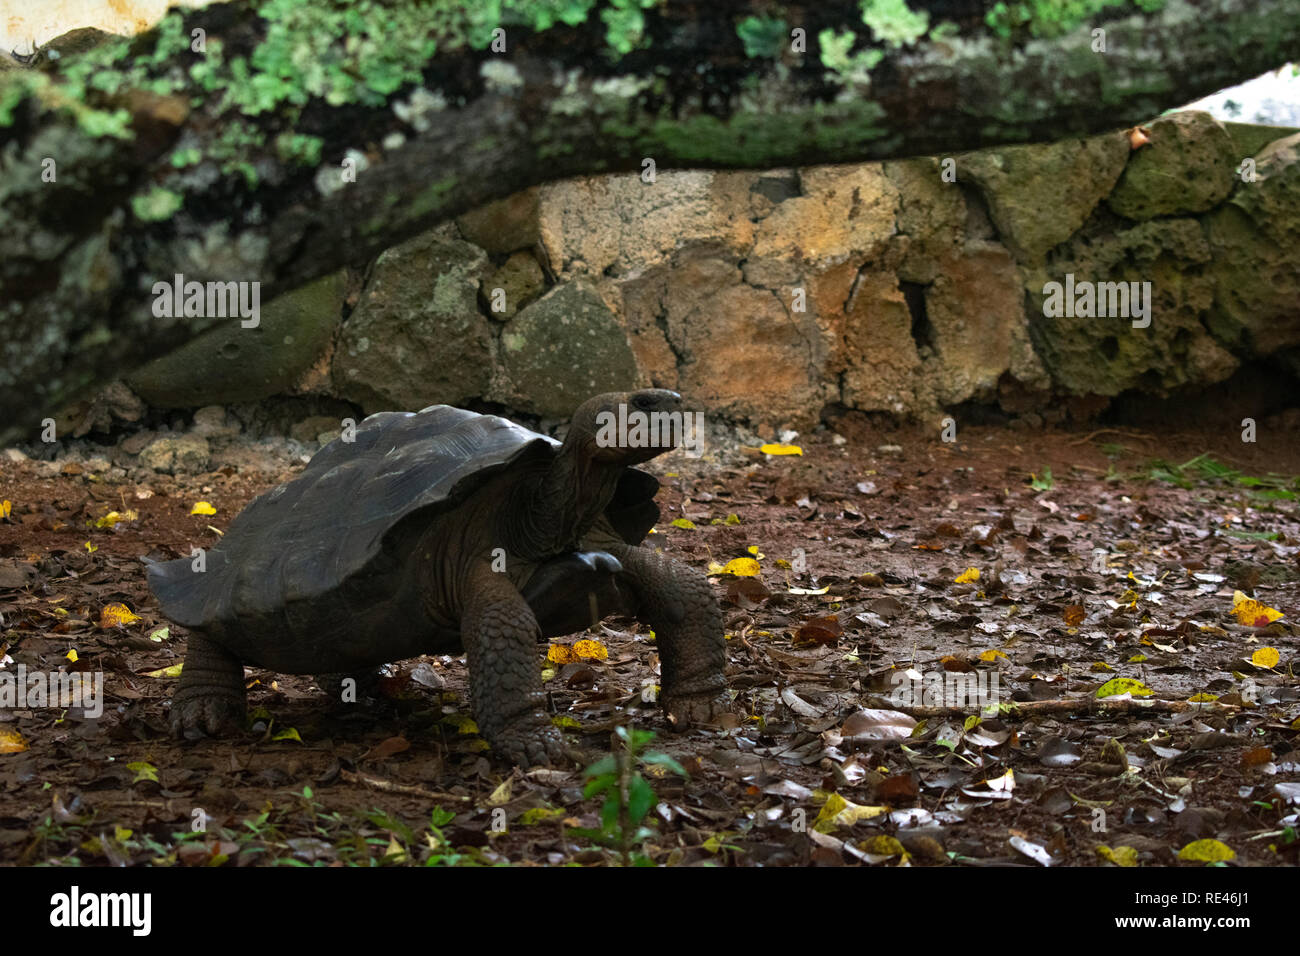 A young Galapagos tortoise between 7-15 years old, in this sanctuary the tortoises are free roaming the trails. Stock Photo